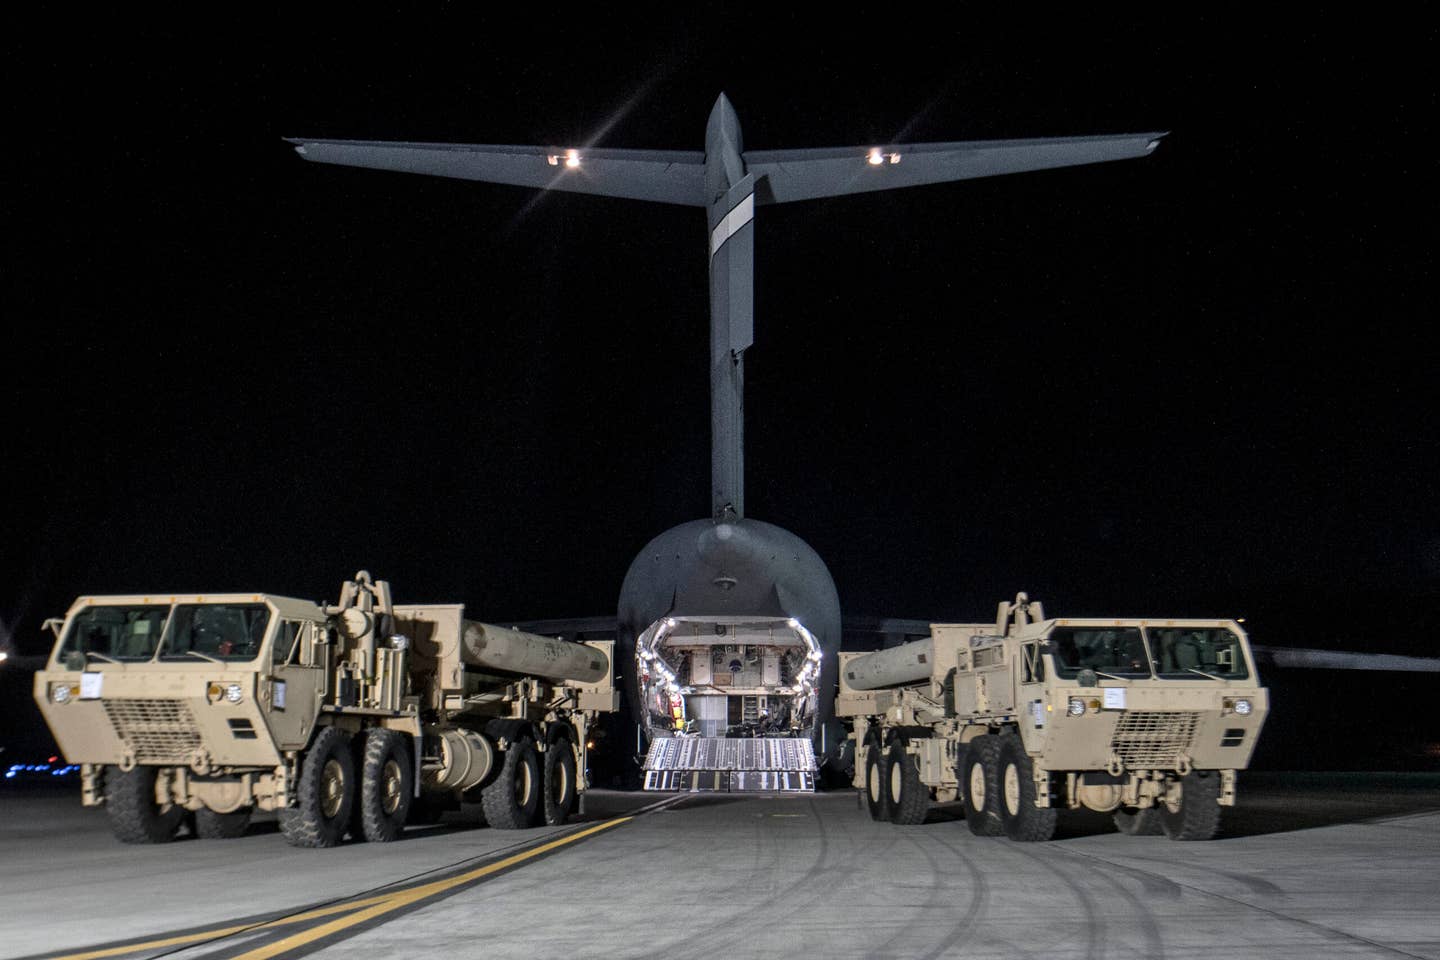 A truck carrying parts of U.S. missile launchers and other equipment needed to set up the Terminal High Altitude Area Defense (THAAD) missile defense system arrive at Osan Air Base, South Korea. <em>Getty Images</em>